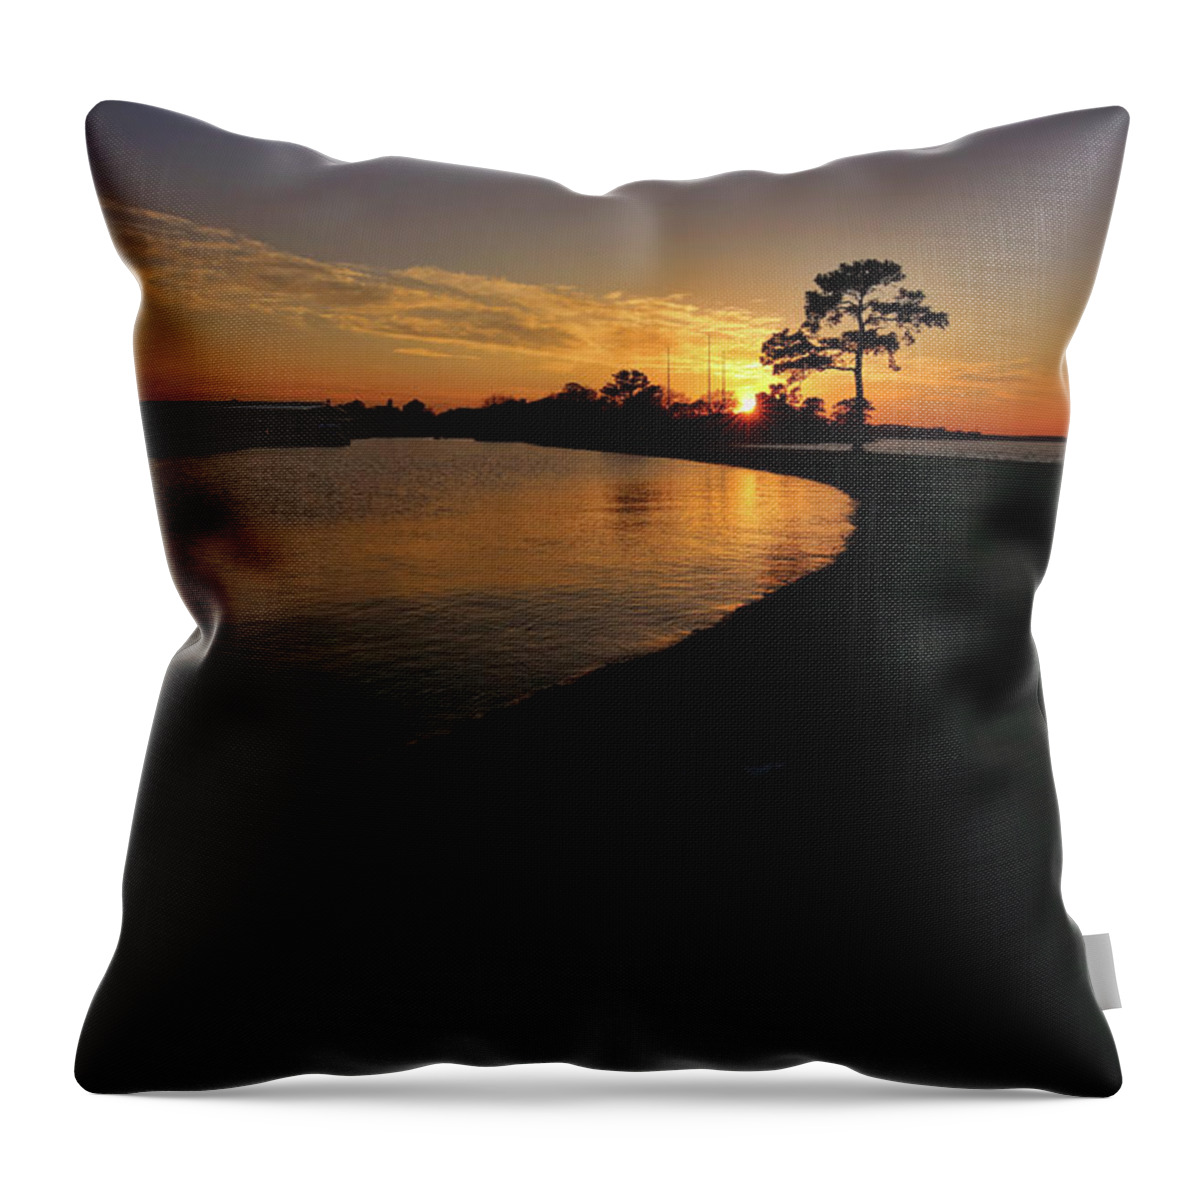 Lake Conroe Throw Pillow featuring the photograph Lake Conroe Sunset by Judy Vincent